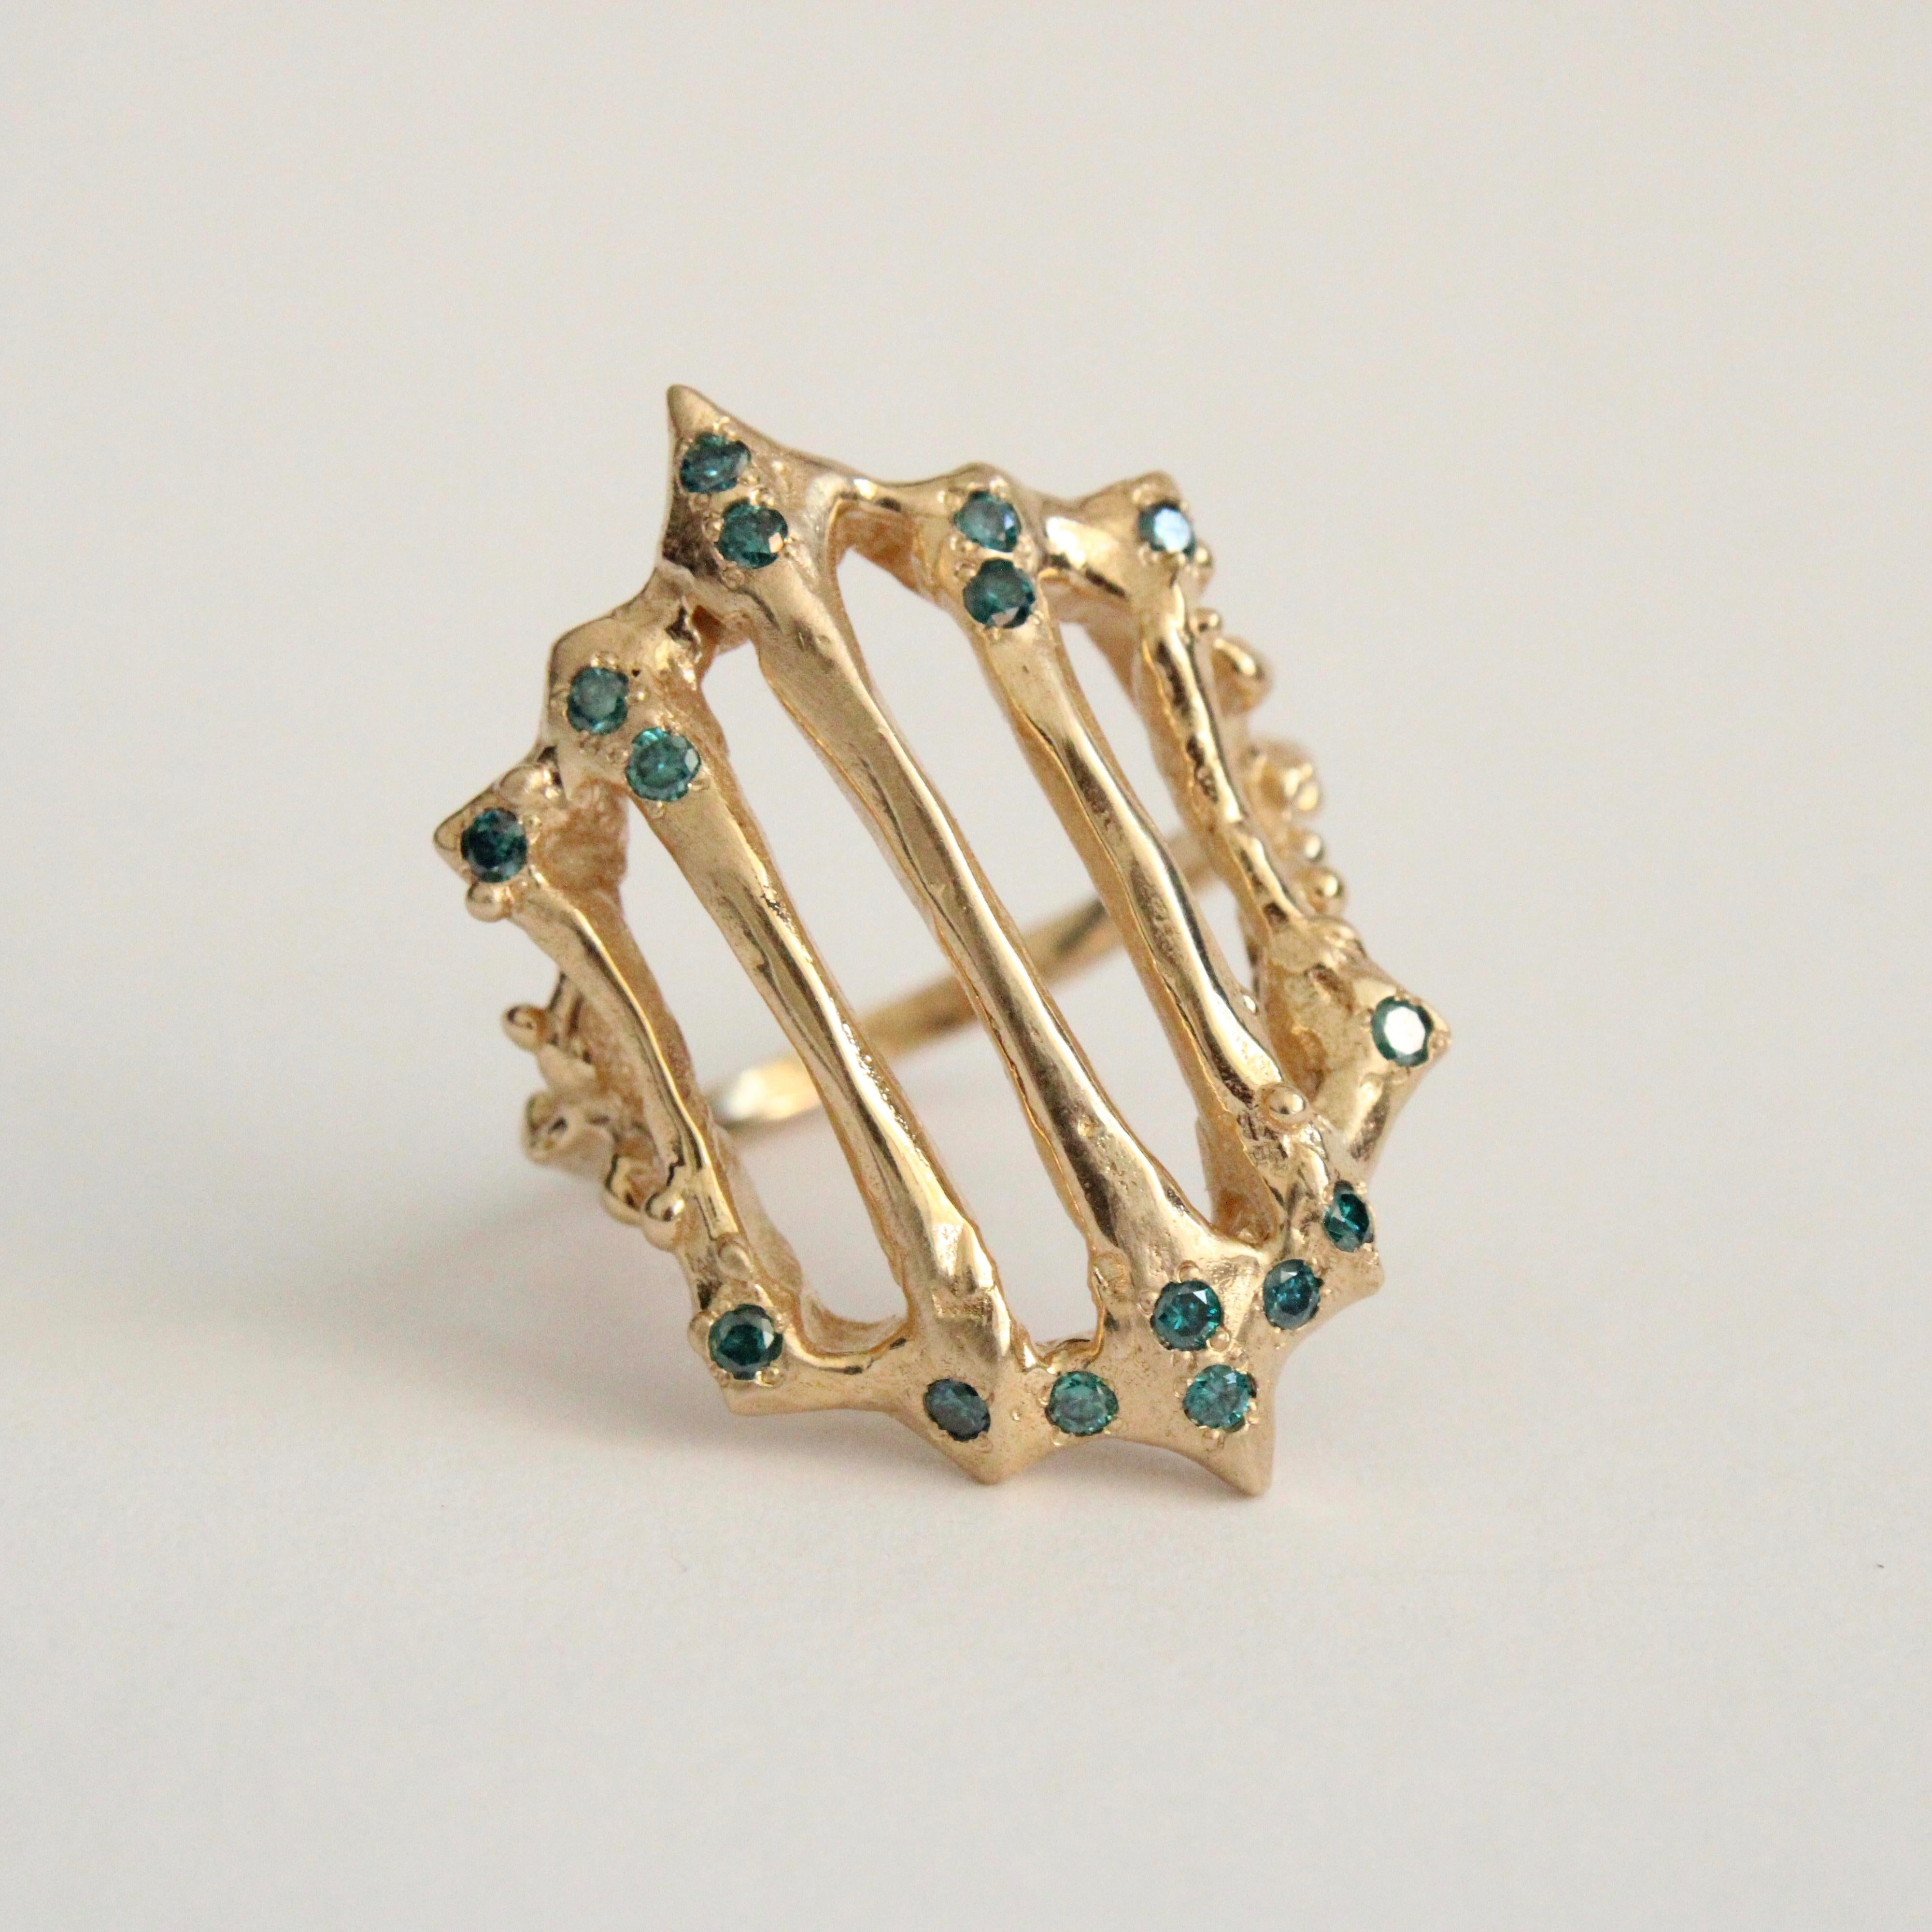 14k gold gate ring with 16 pave set blue diamonds.  Fashioned after old iron gates, this piece is substantial on the hand measuring about 1 inch from top to bottom. Solid 14k yellow gold . This unisex style is a stand alone, gorgeous piece. Stones